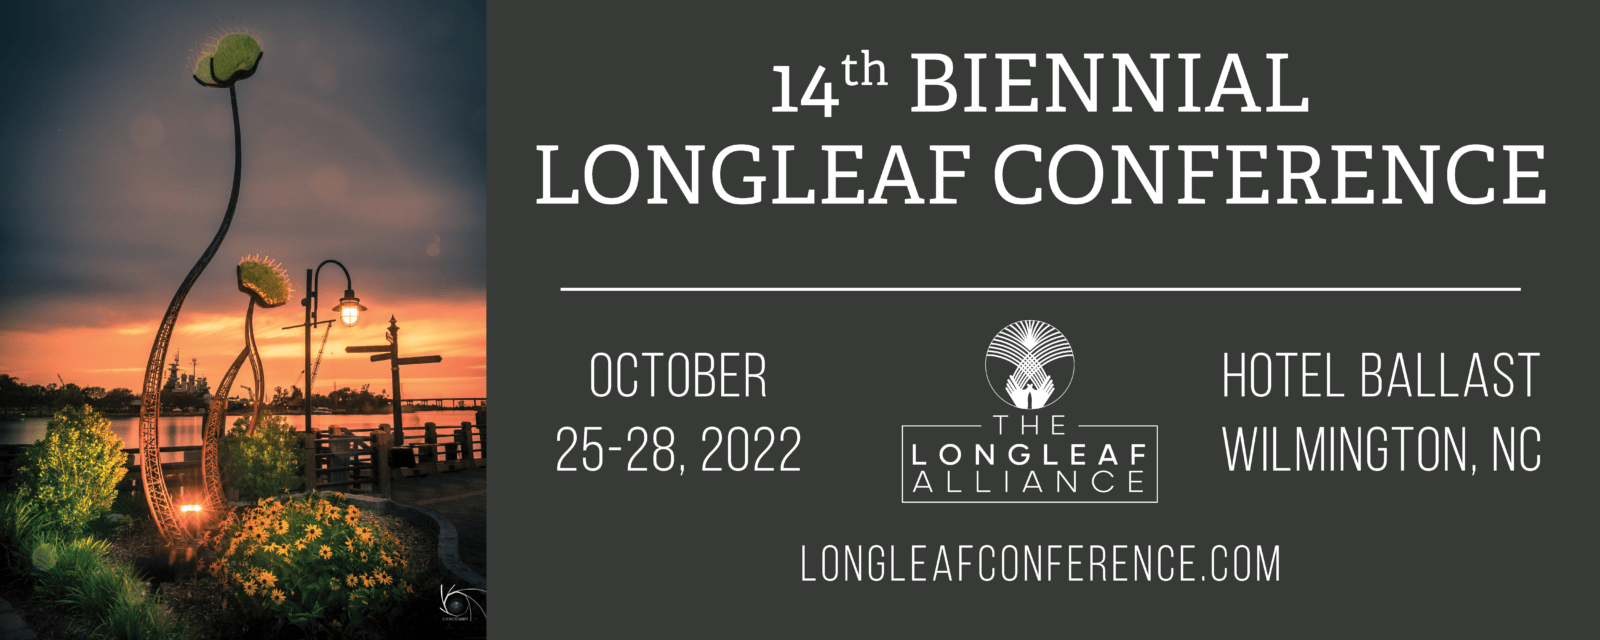 Longleaf Conference Save-the-date 3.15.2022